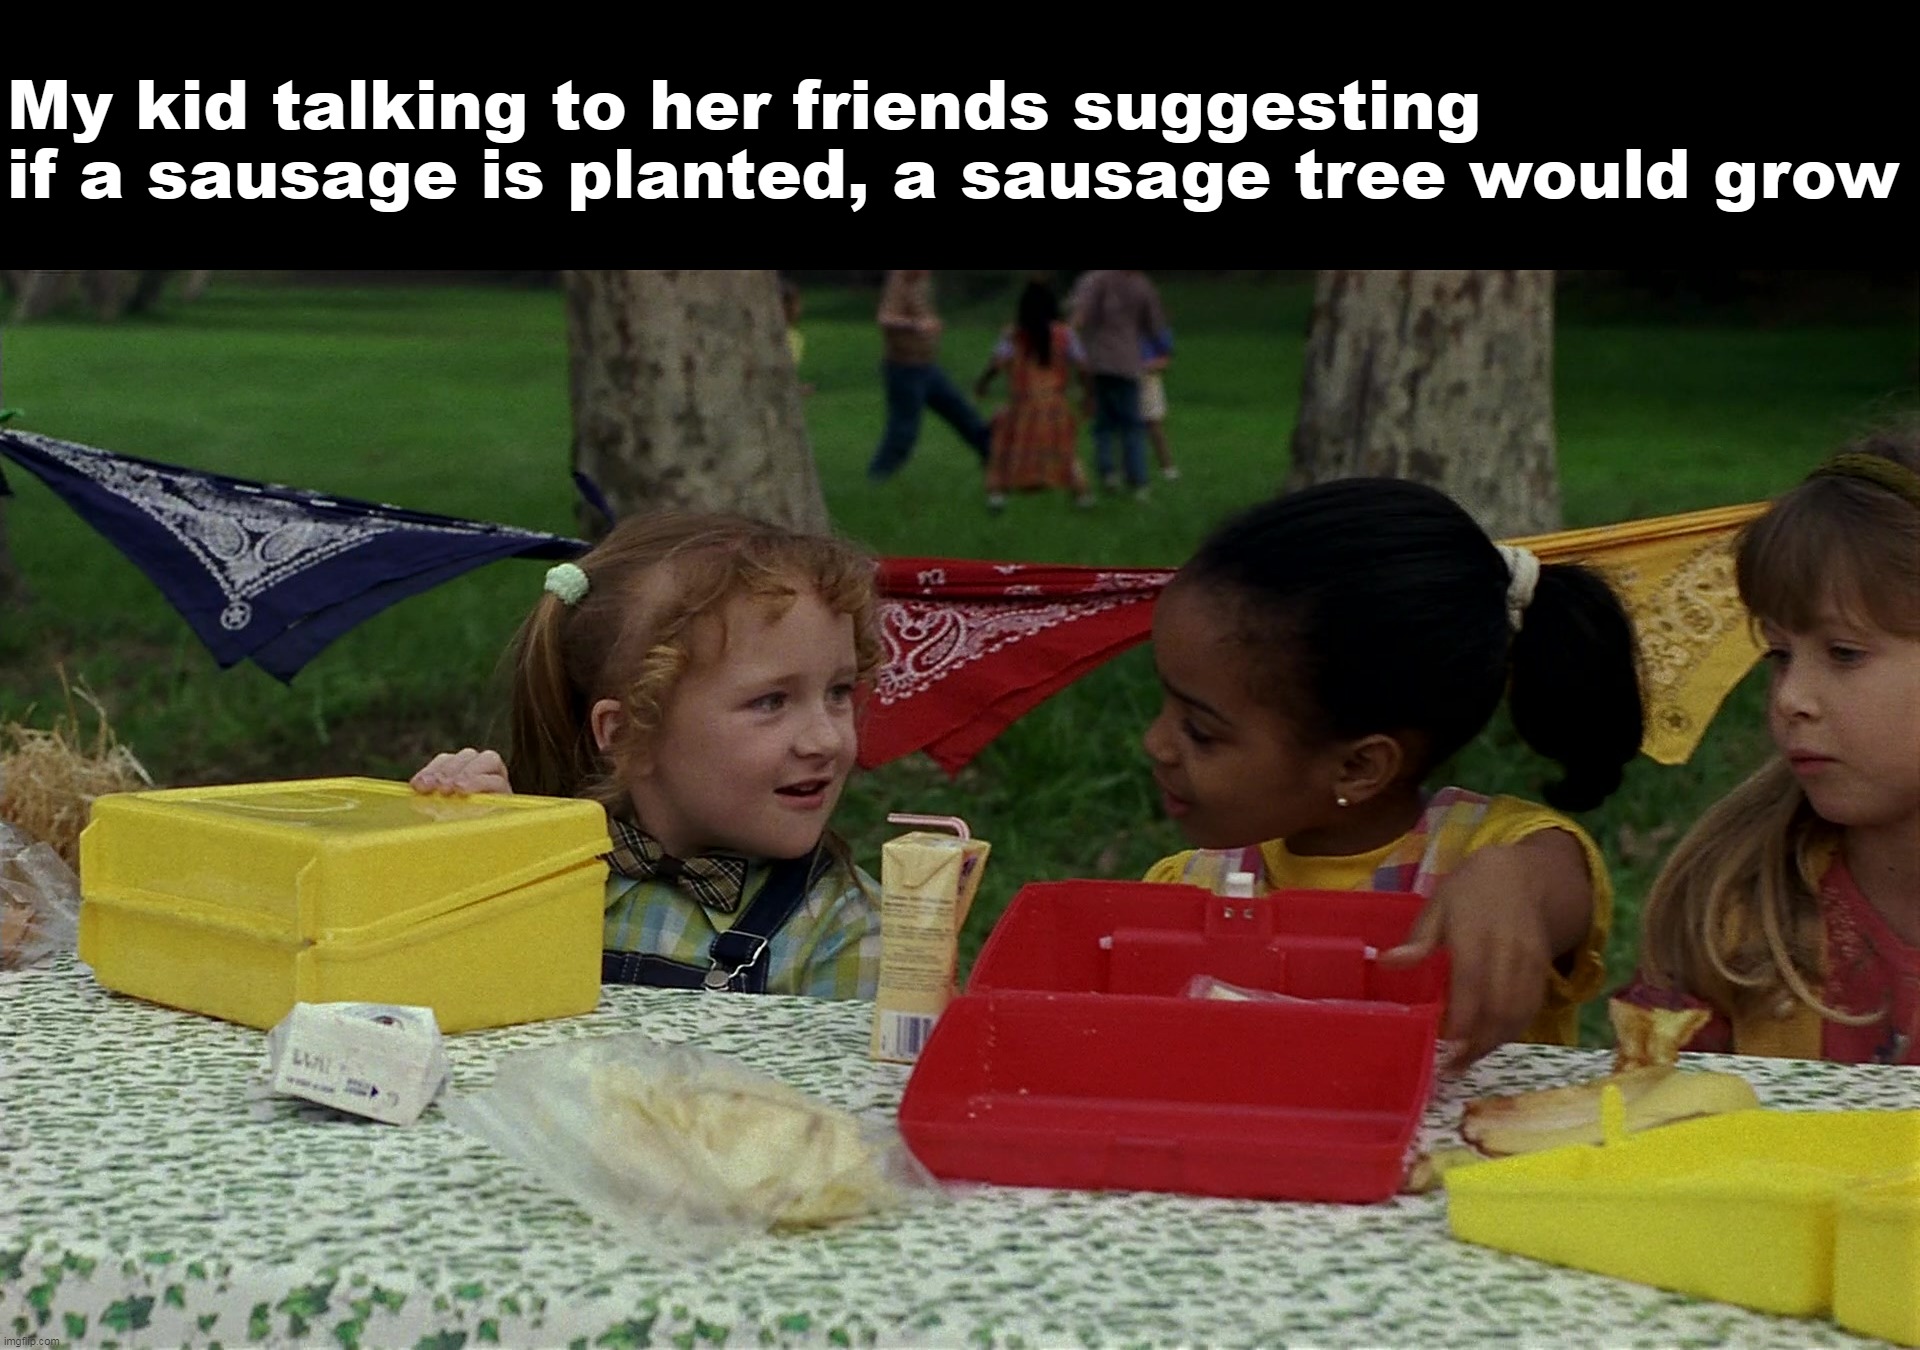 My kid talking to her friends suggesting if a sausage is planted, a sausage tree would grow | image tagged in meme,memes,funny,humor | made w/ Imgflip meme maker